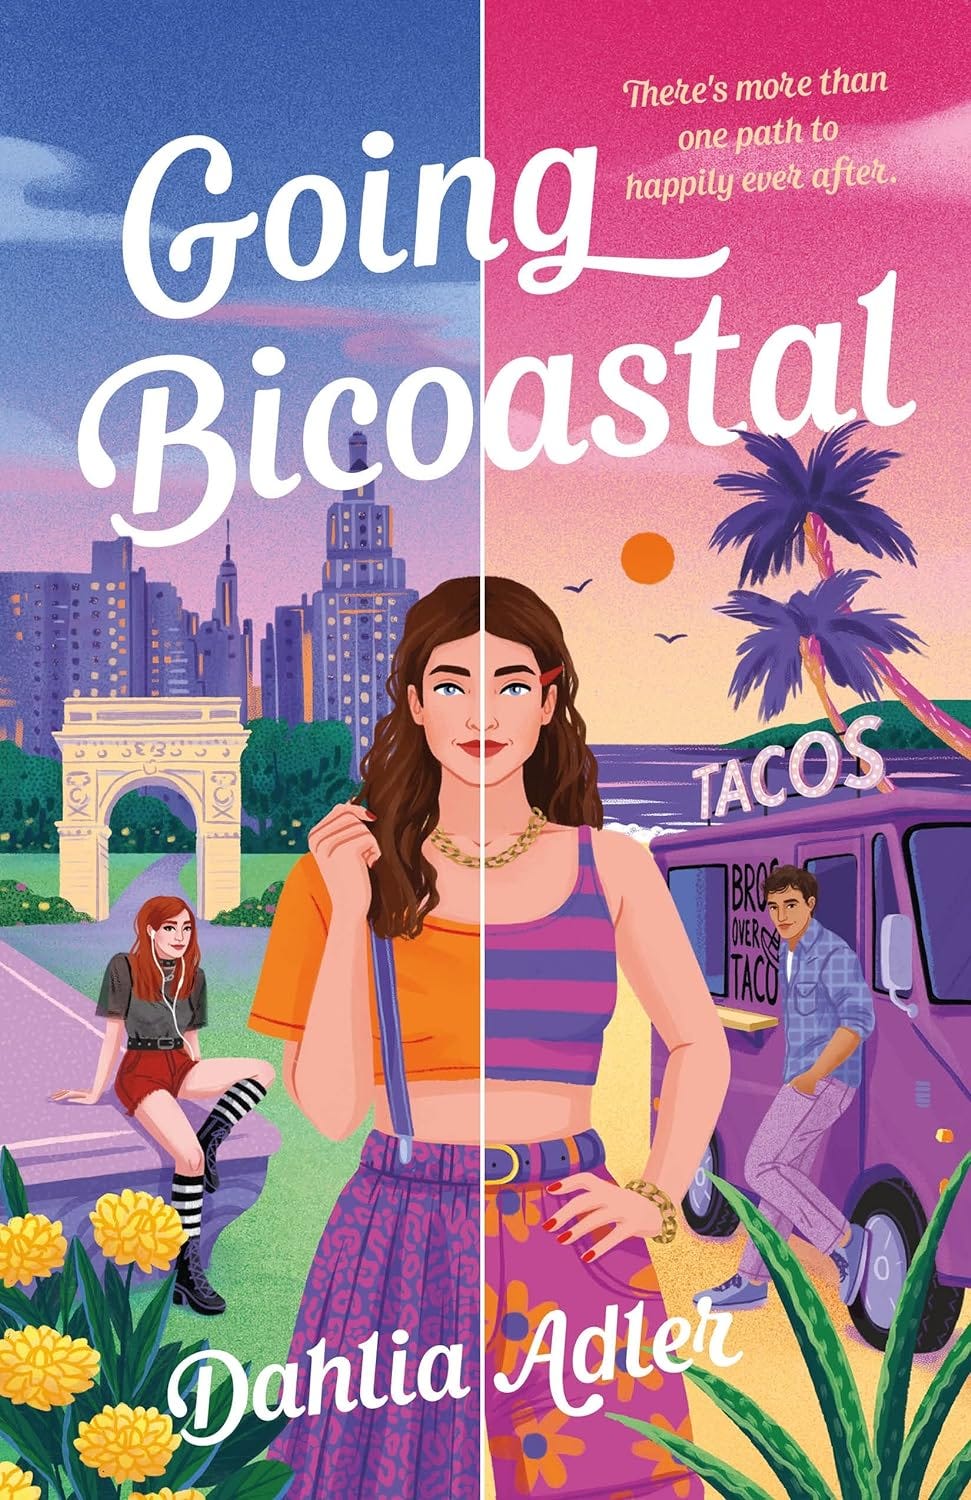 the cover of going bicoastal shows a brunette teen girl with NYC on the left, and a red-haired goth girl, and Los Angeles on the right, with a brown-haired boy in front of a taco truck